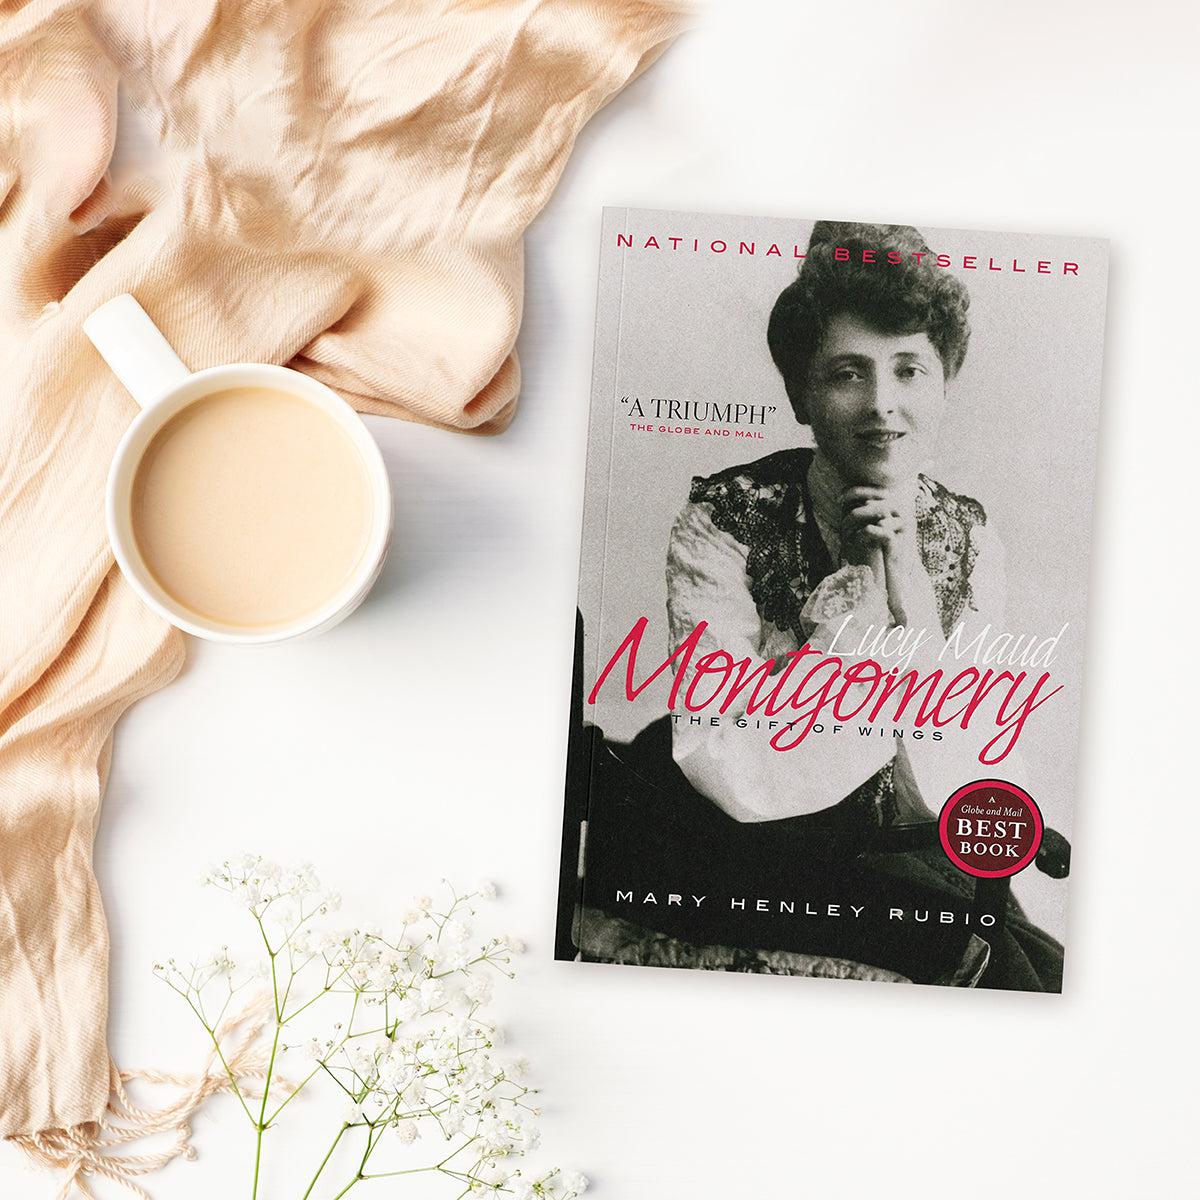 "Lucy Maud Montgomery: The Gift of Wings" By Mary Henley Rubio